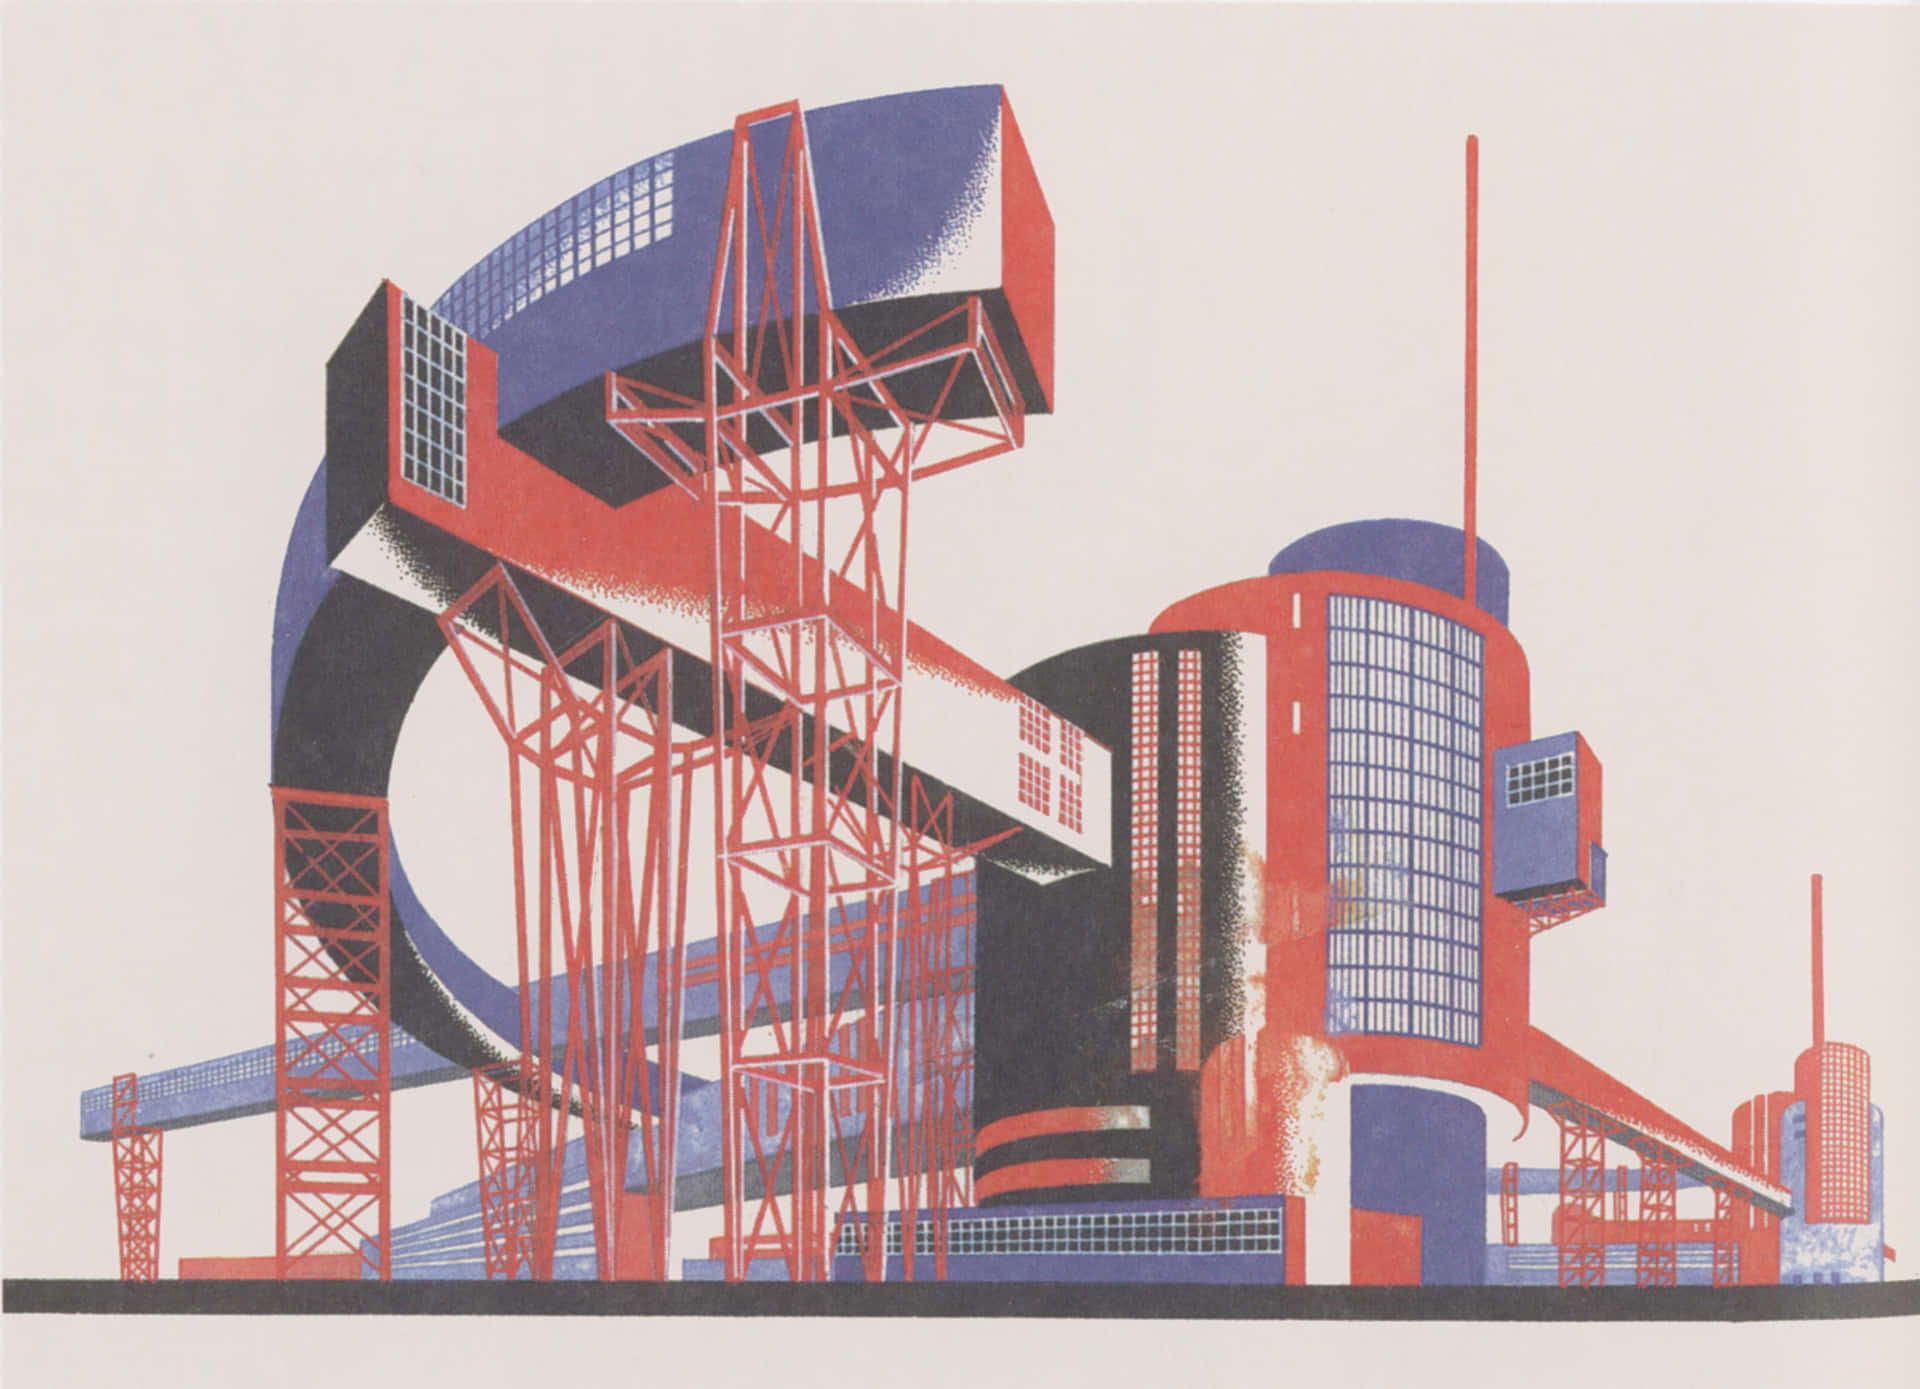 Modern Industrial Structure Inspired by Constructivism Art Movement Wallpaper